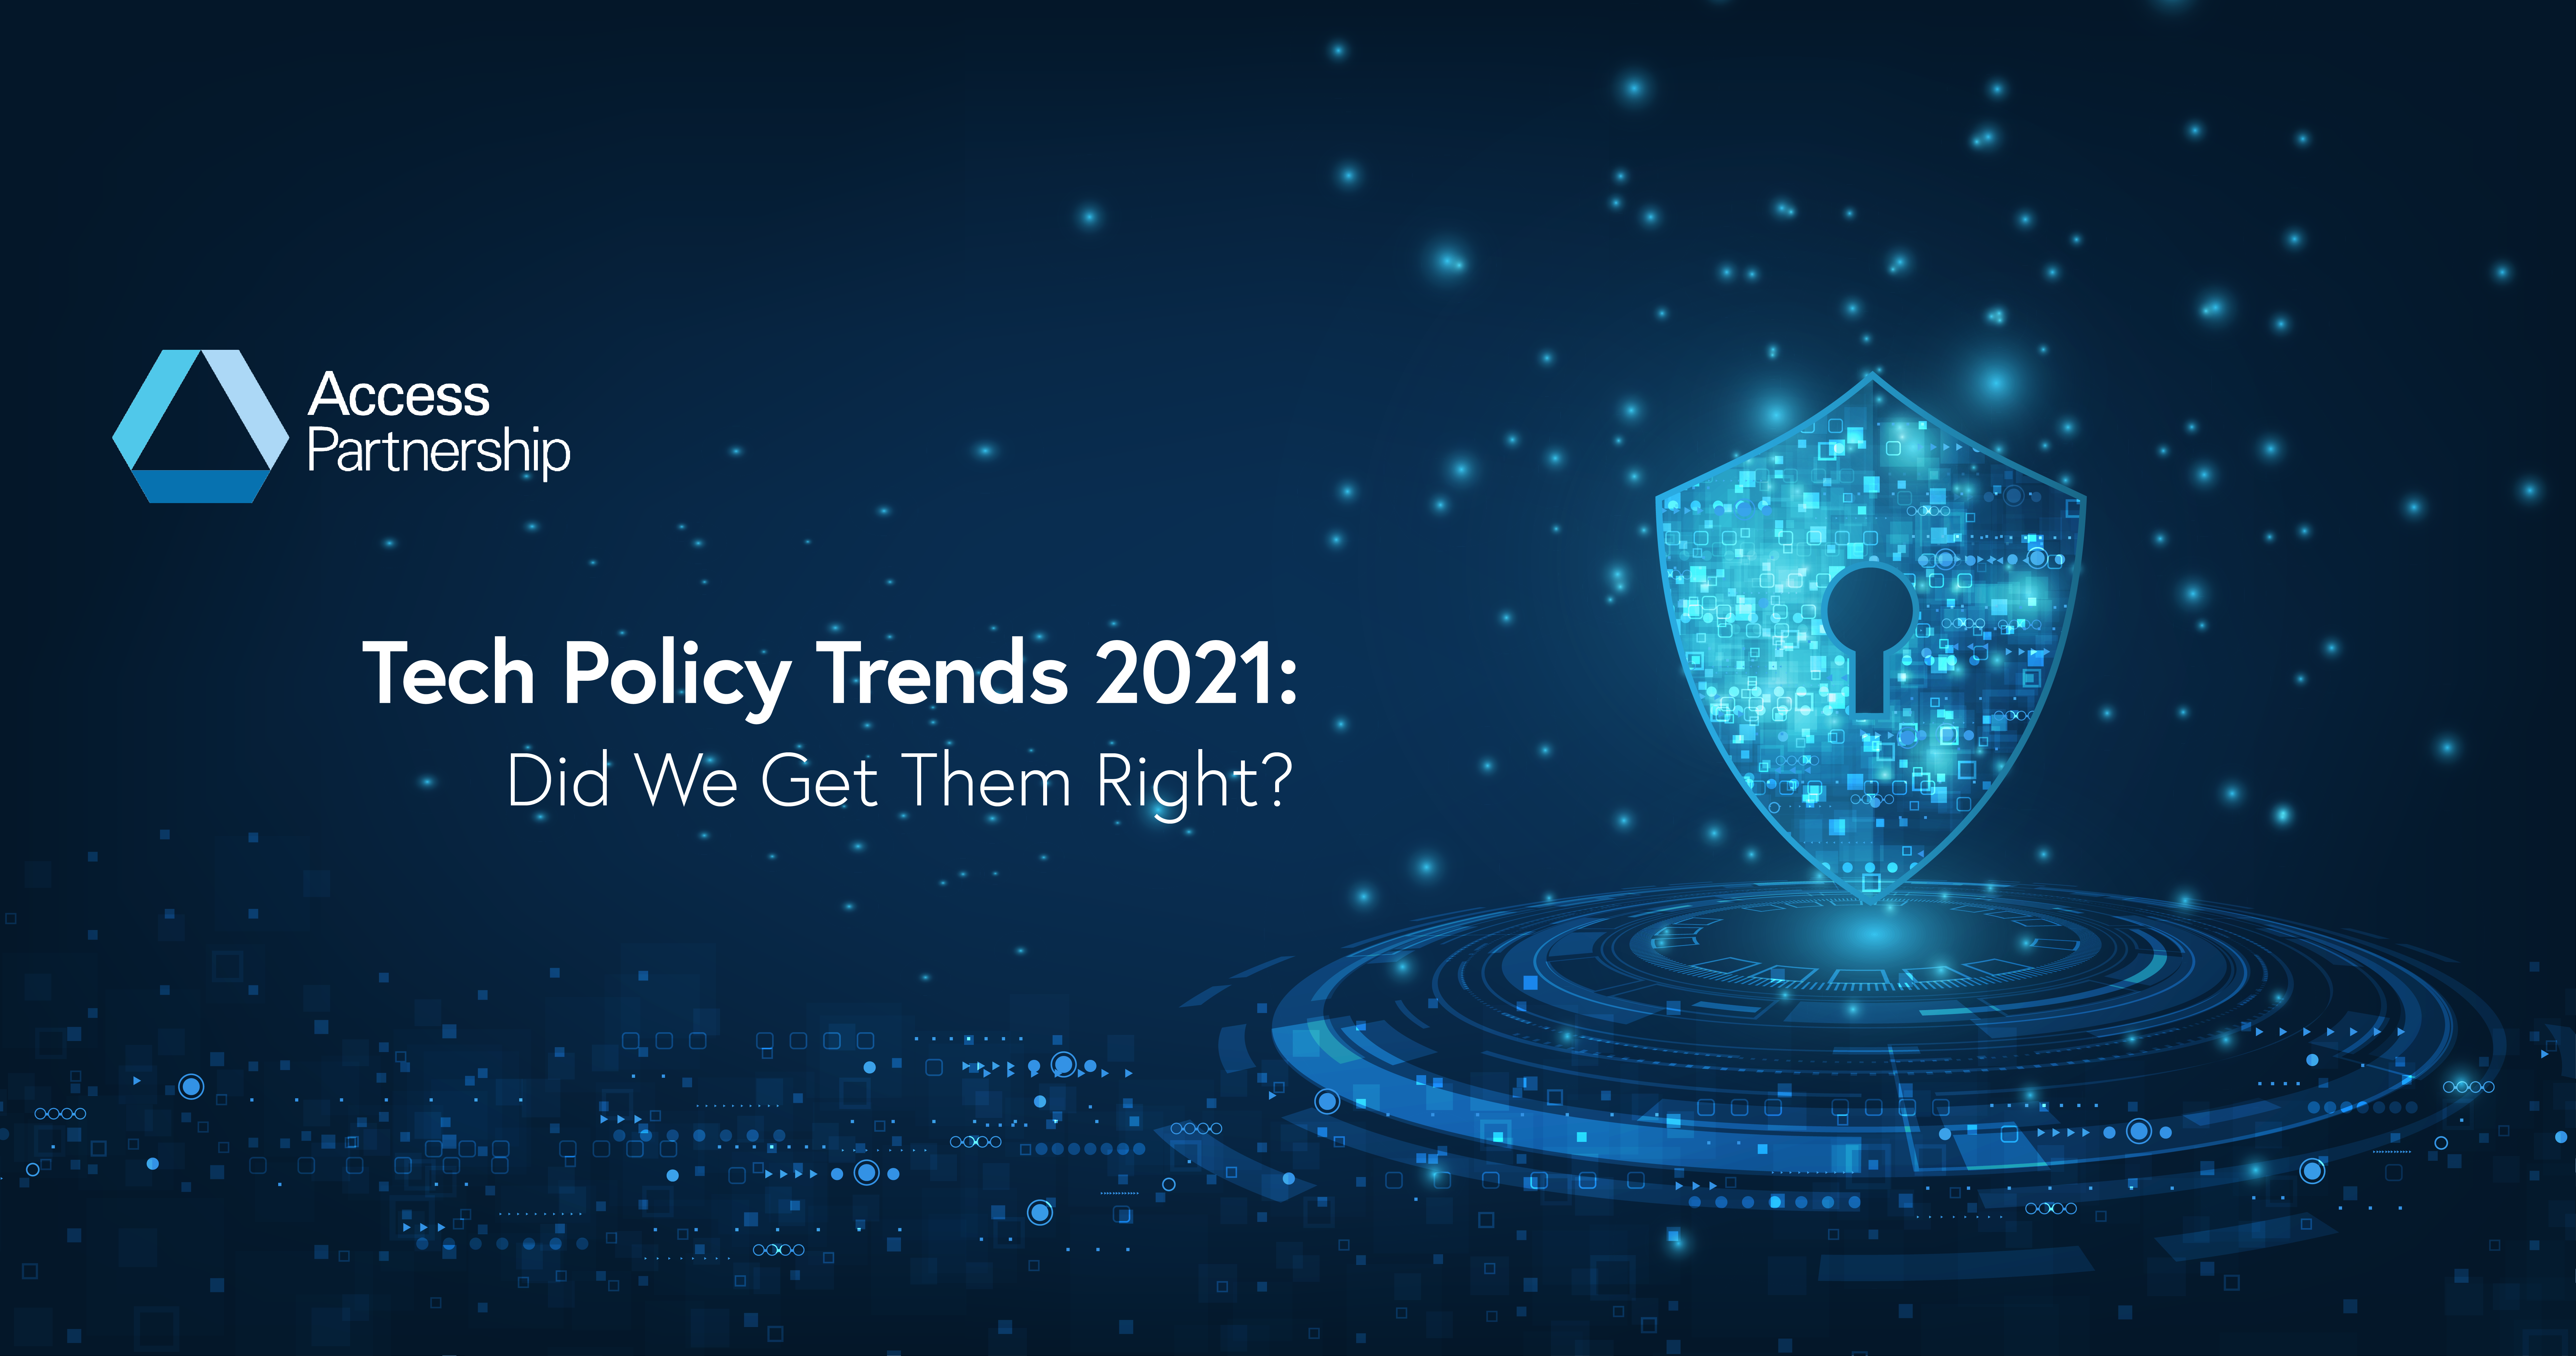 Tech Policy Trends 2021 | Did We Get Them Right?